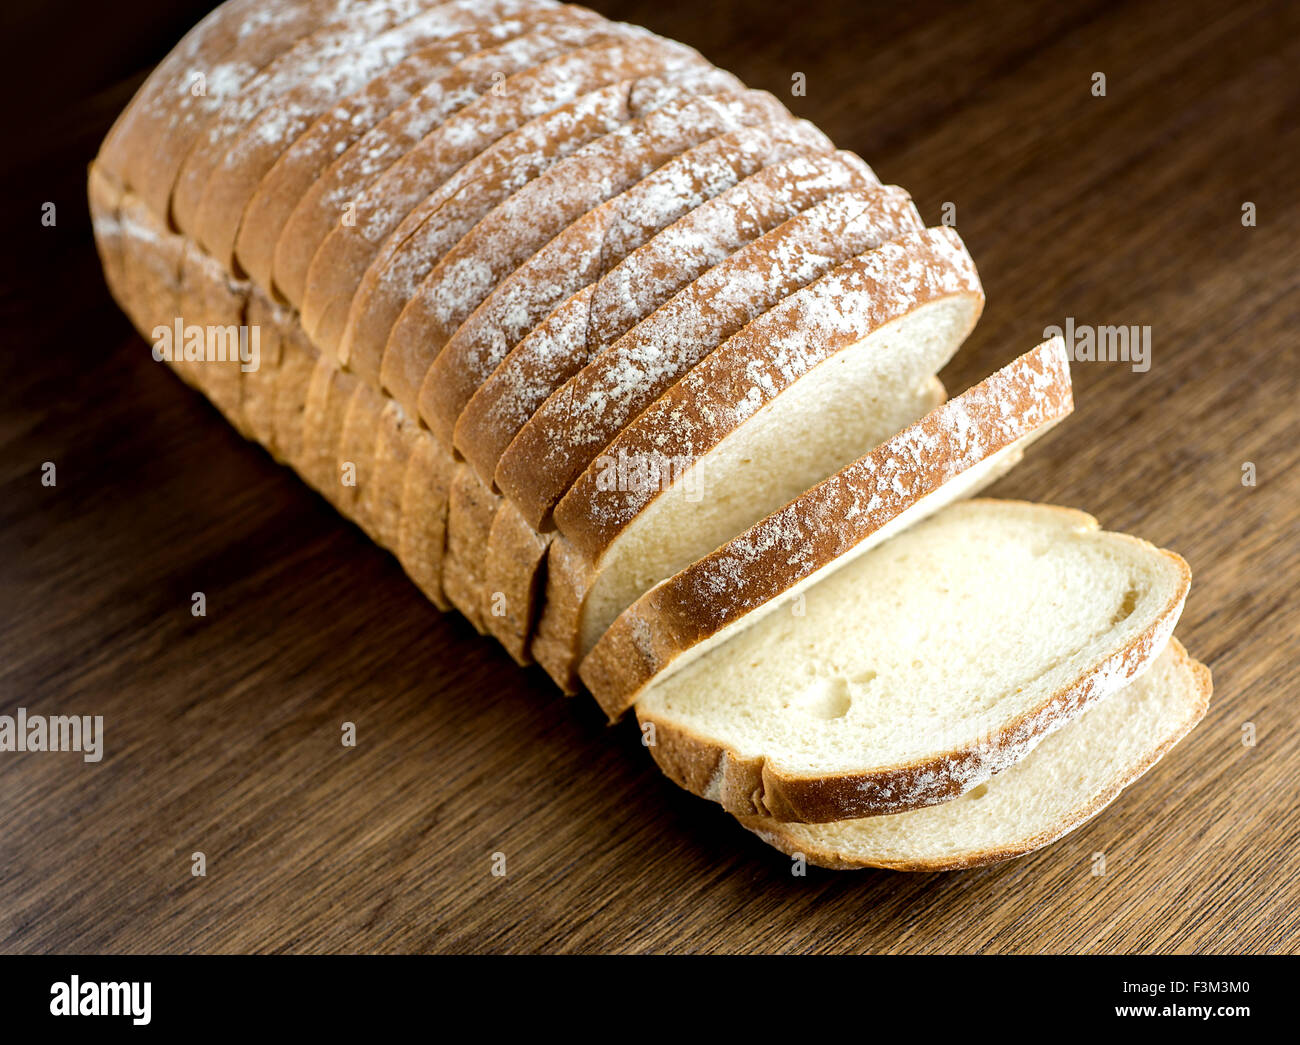 Freshly baked bread against rustic backdrop Stock Photo